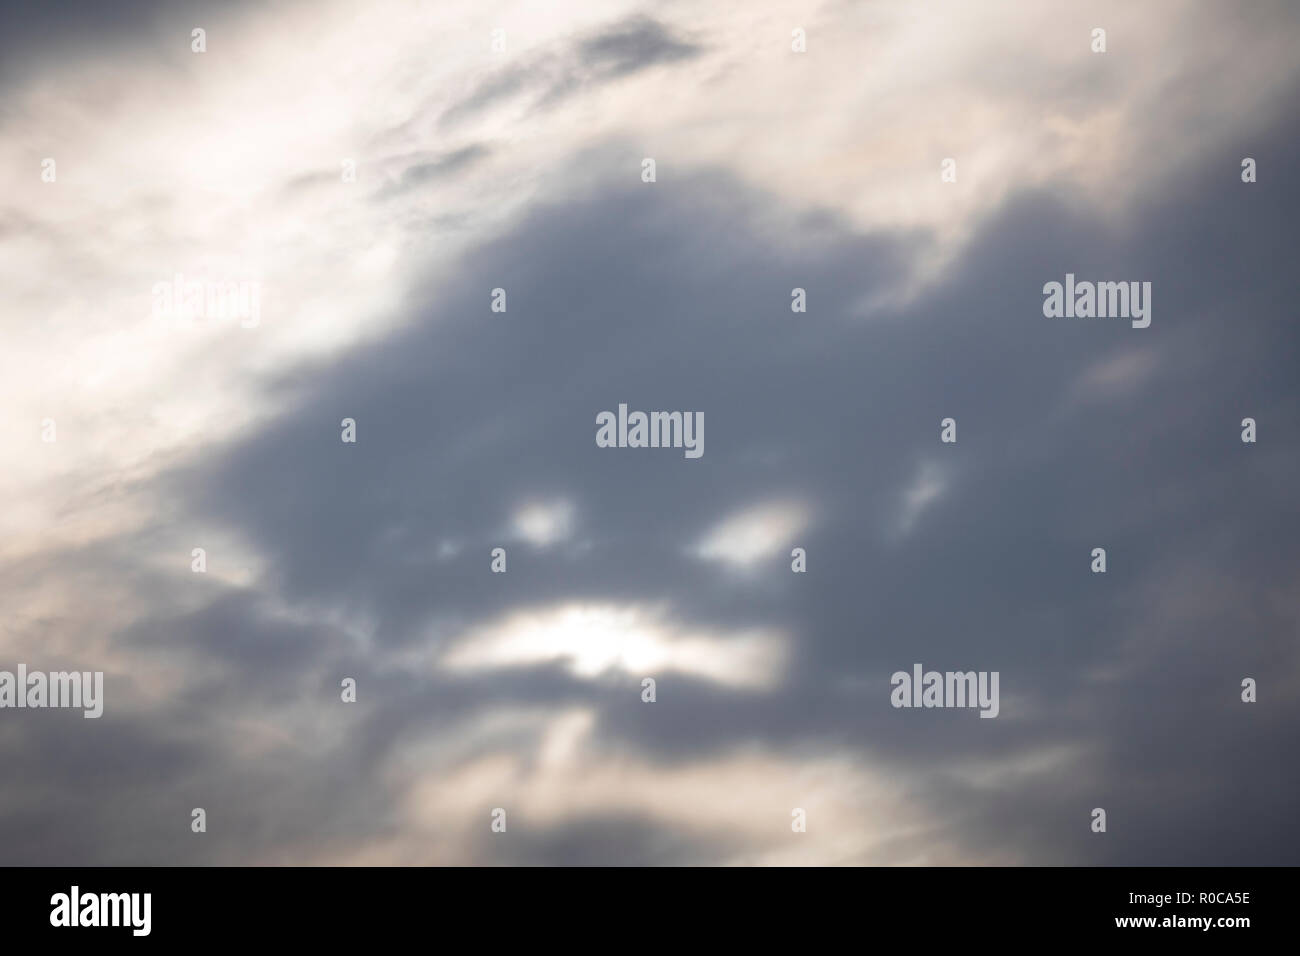 An angry face in the clouds. Stock Photo